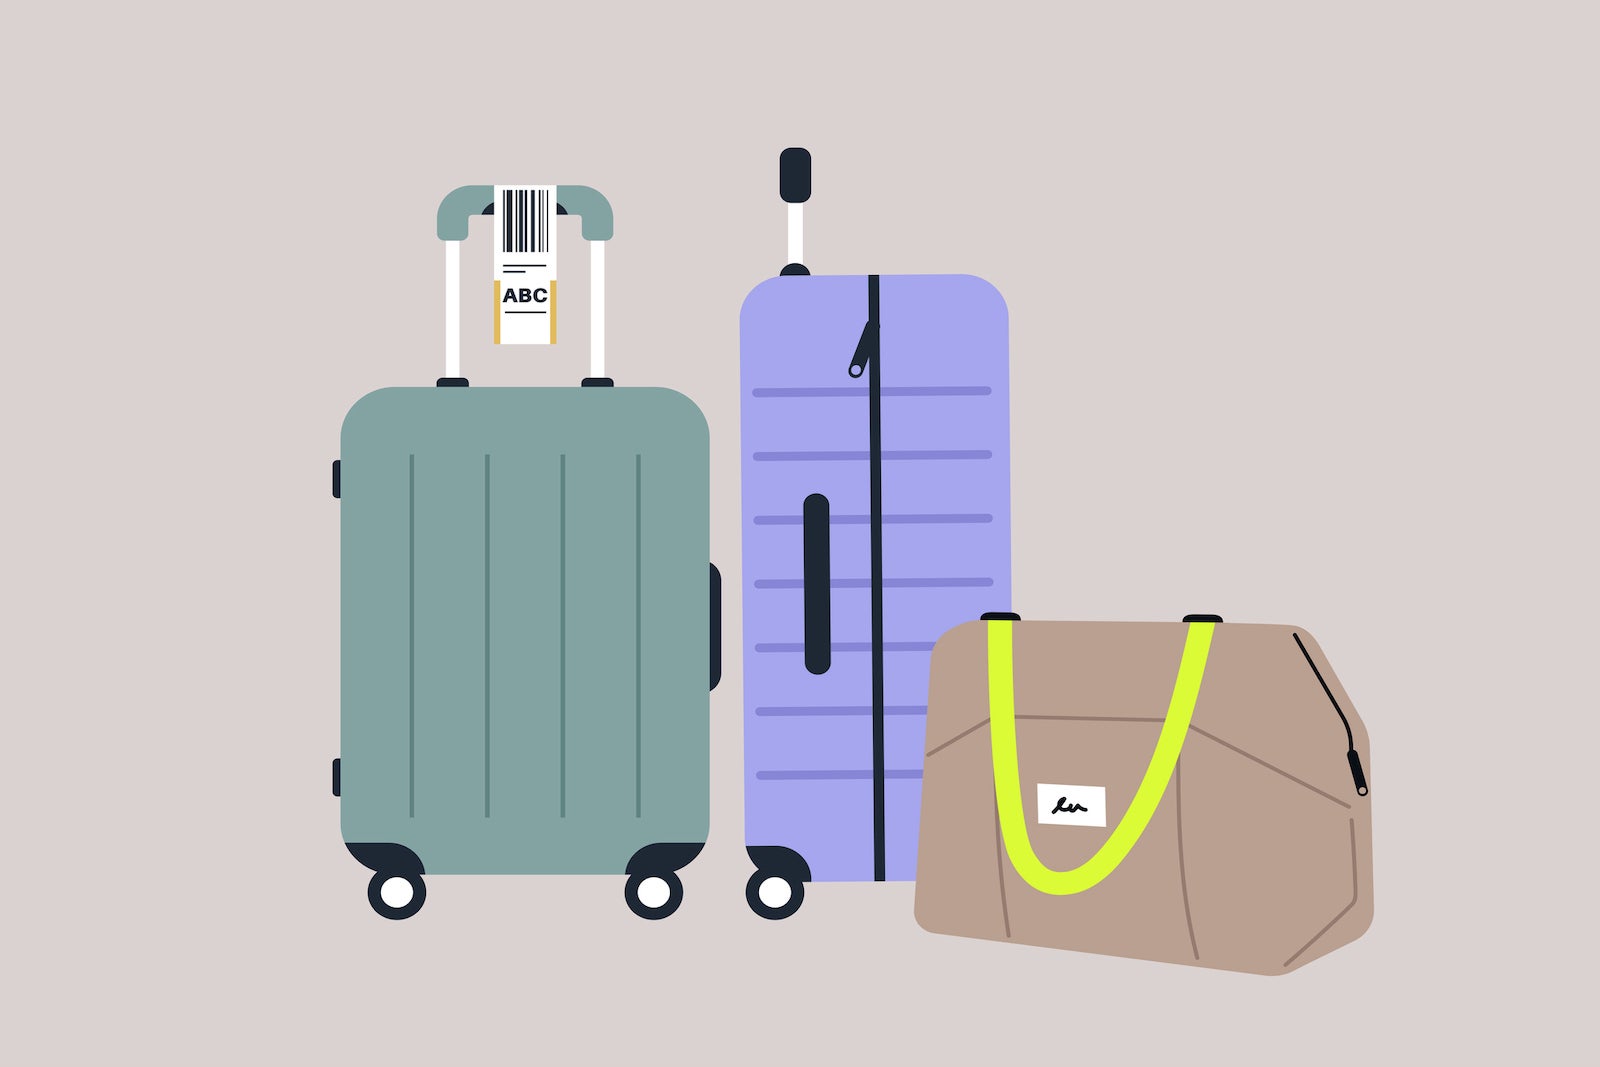 Airline Carry-on Luggage Size: Everything You Need to Know - The Points Guy